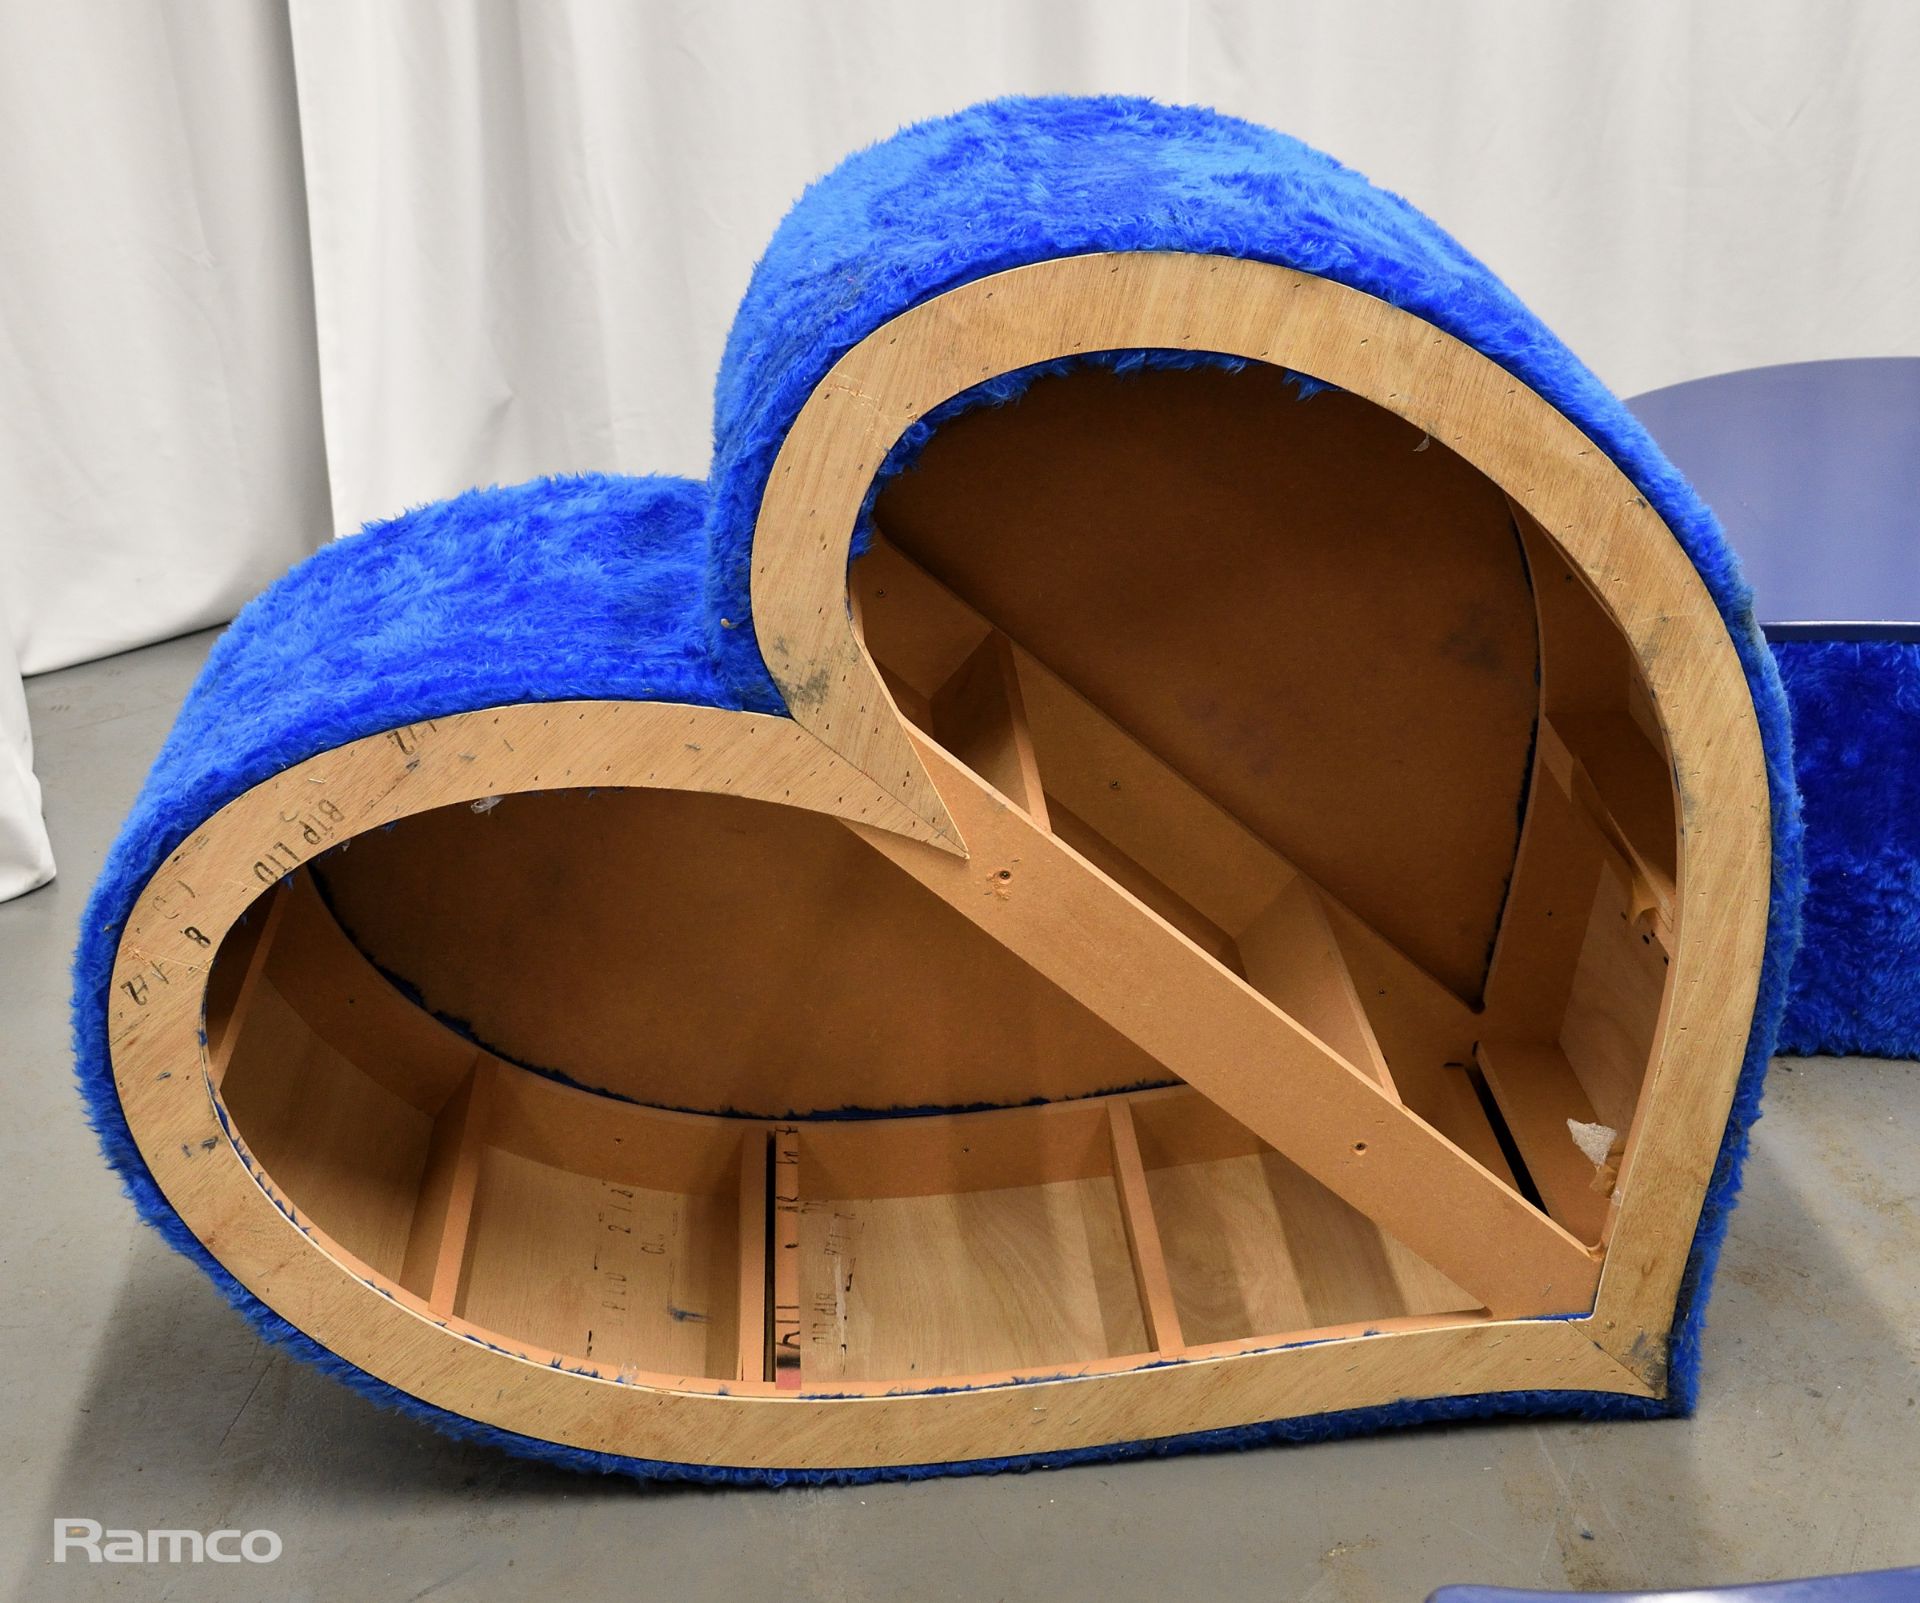 3x Asymmetrical heart shaped blue fur-covered wooden tables from countries' seating area - Image 14 of 14